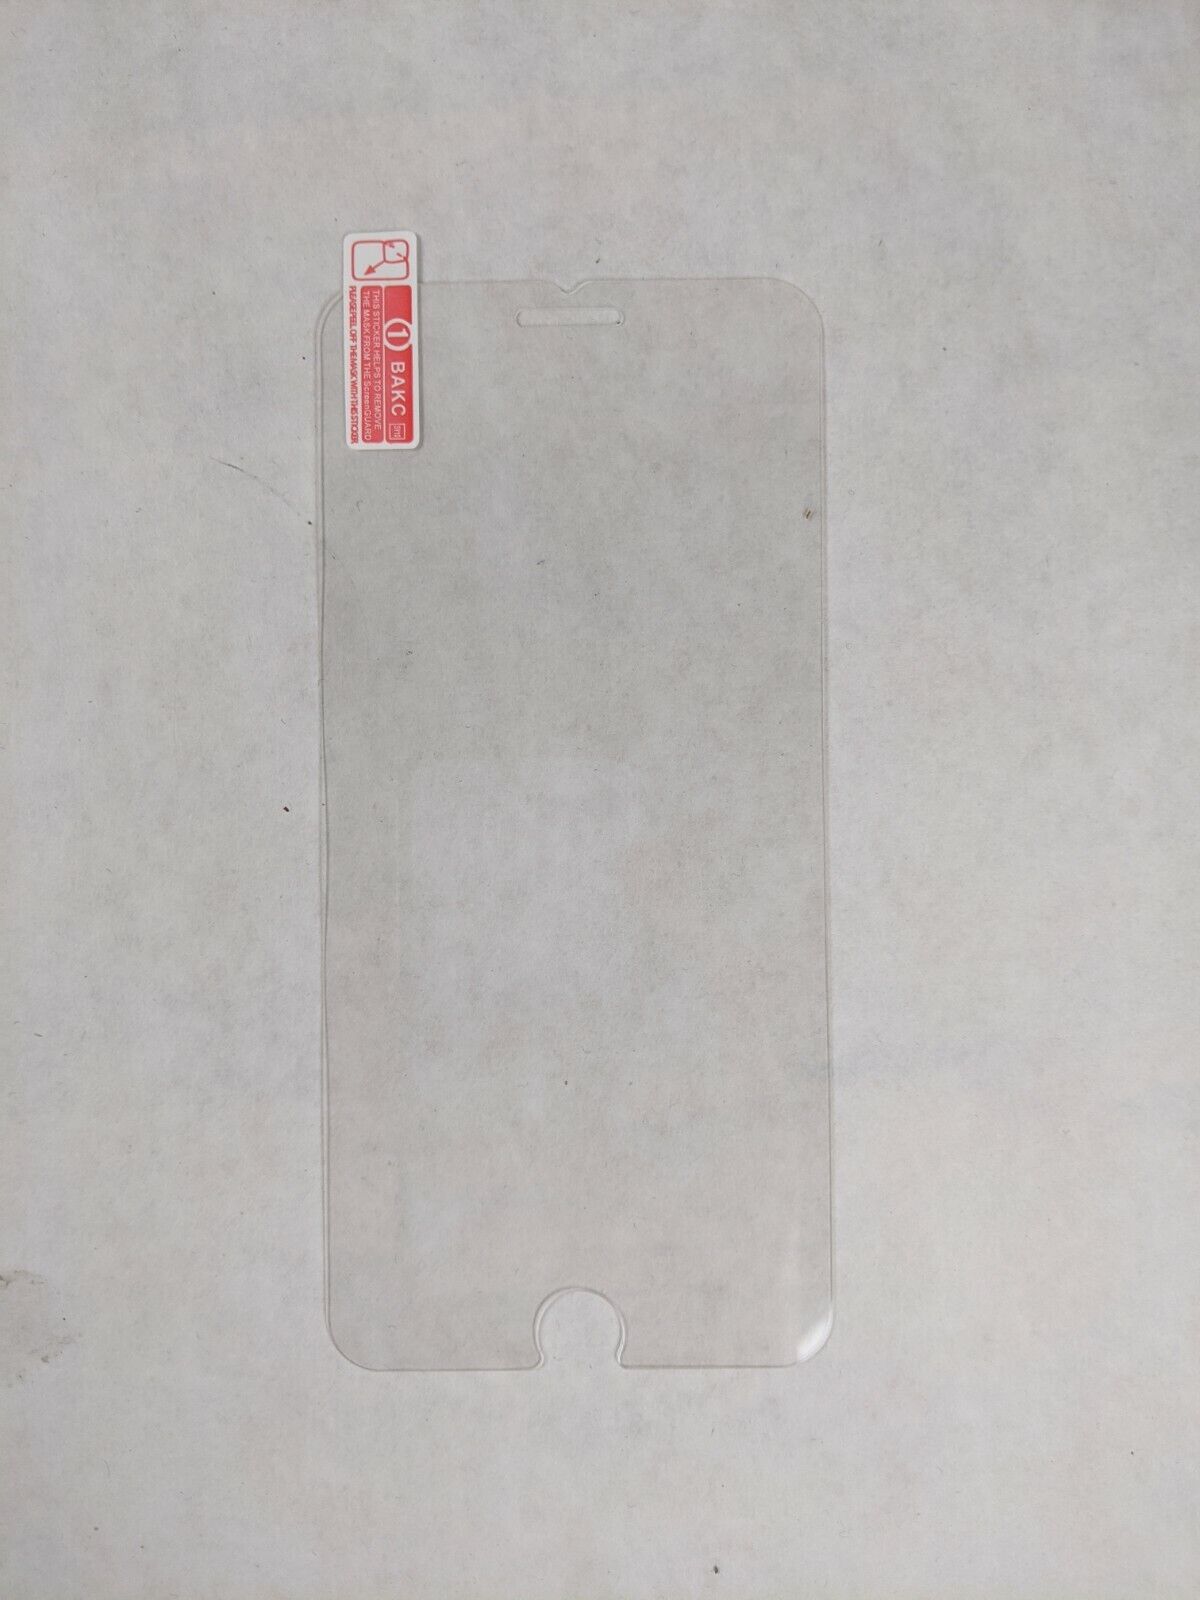 Unbranded Screen Protector for iPhone 6/7 Plus TG-7P-BULK 6+, 7+